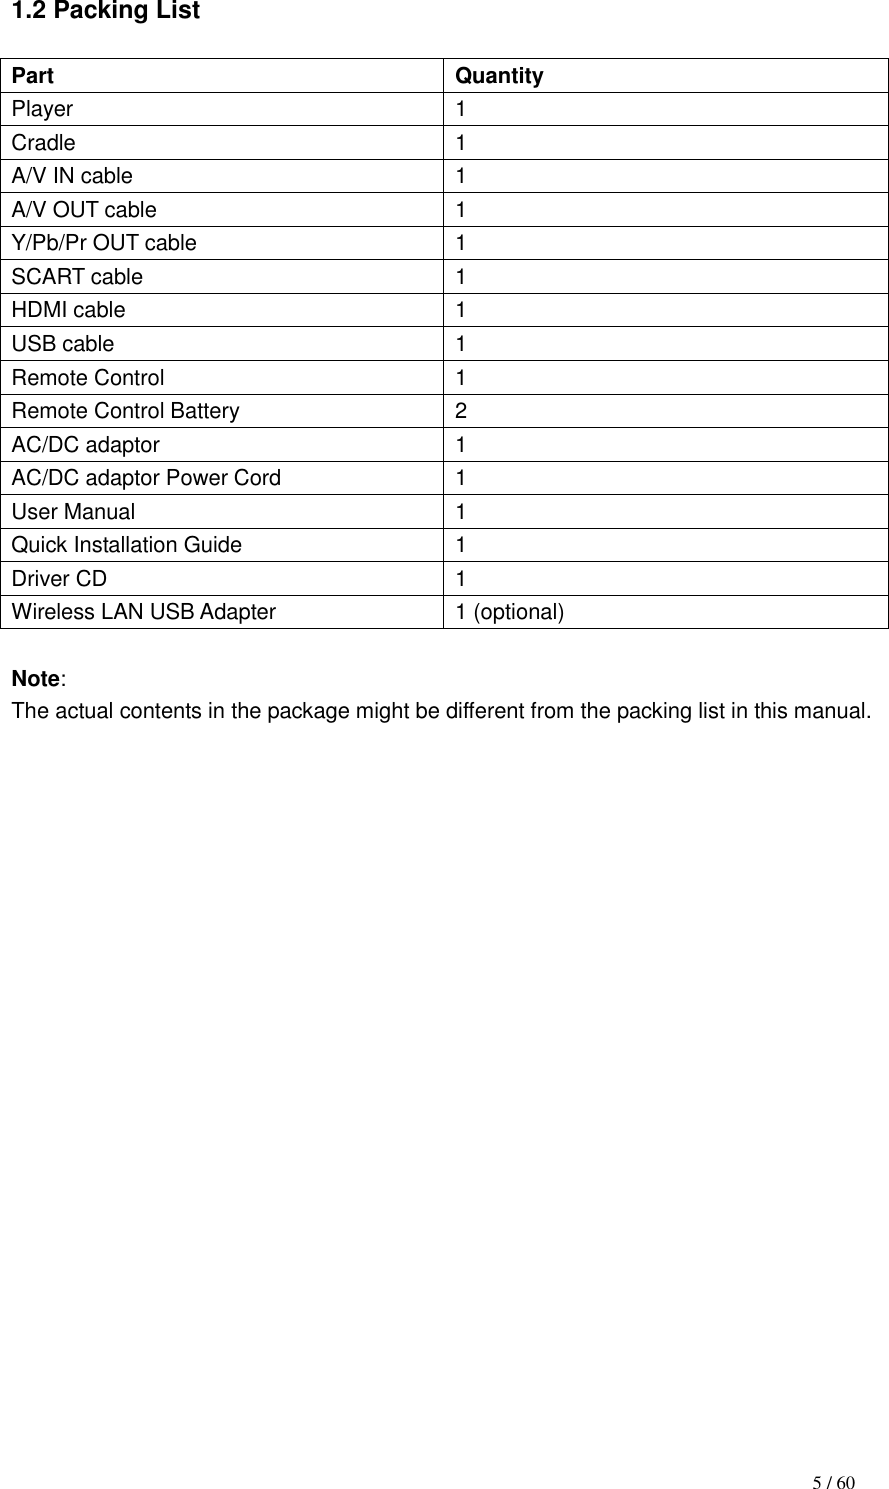                                                                                    5 / 60 1.2 Packing List  Part Quantity Player 1 Cradle 1 A/V IN cable 1 A/V OUT cable 1 Y/Pb/Pr OUT cable 1 SCART cable 1 HDMI cable 1 USB cable 1 Remote Control 1 Remote Control Battery 2 AC/DC adaptor 1 AC/DC adaptor Power Cord 1 User Manual 1 Quick Installation Guide 1 Driver CD 1 Wireless LAN USB Adapter 1 (optional)  Note: The actual contents in the package might be different from the packing list in this manual.                       